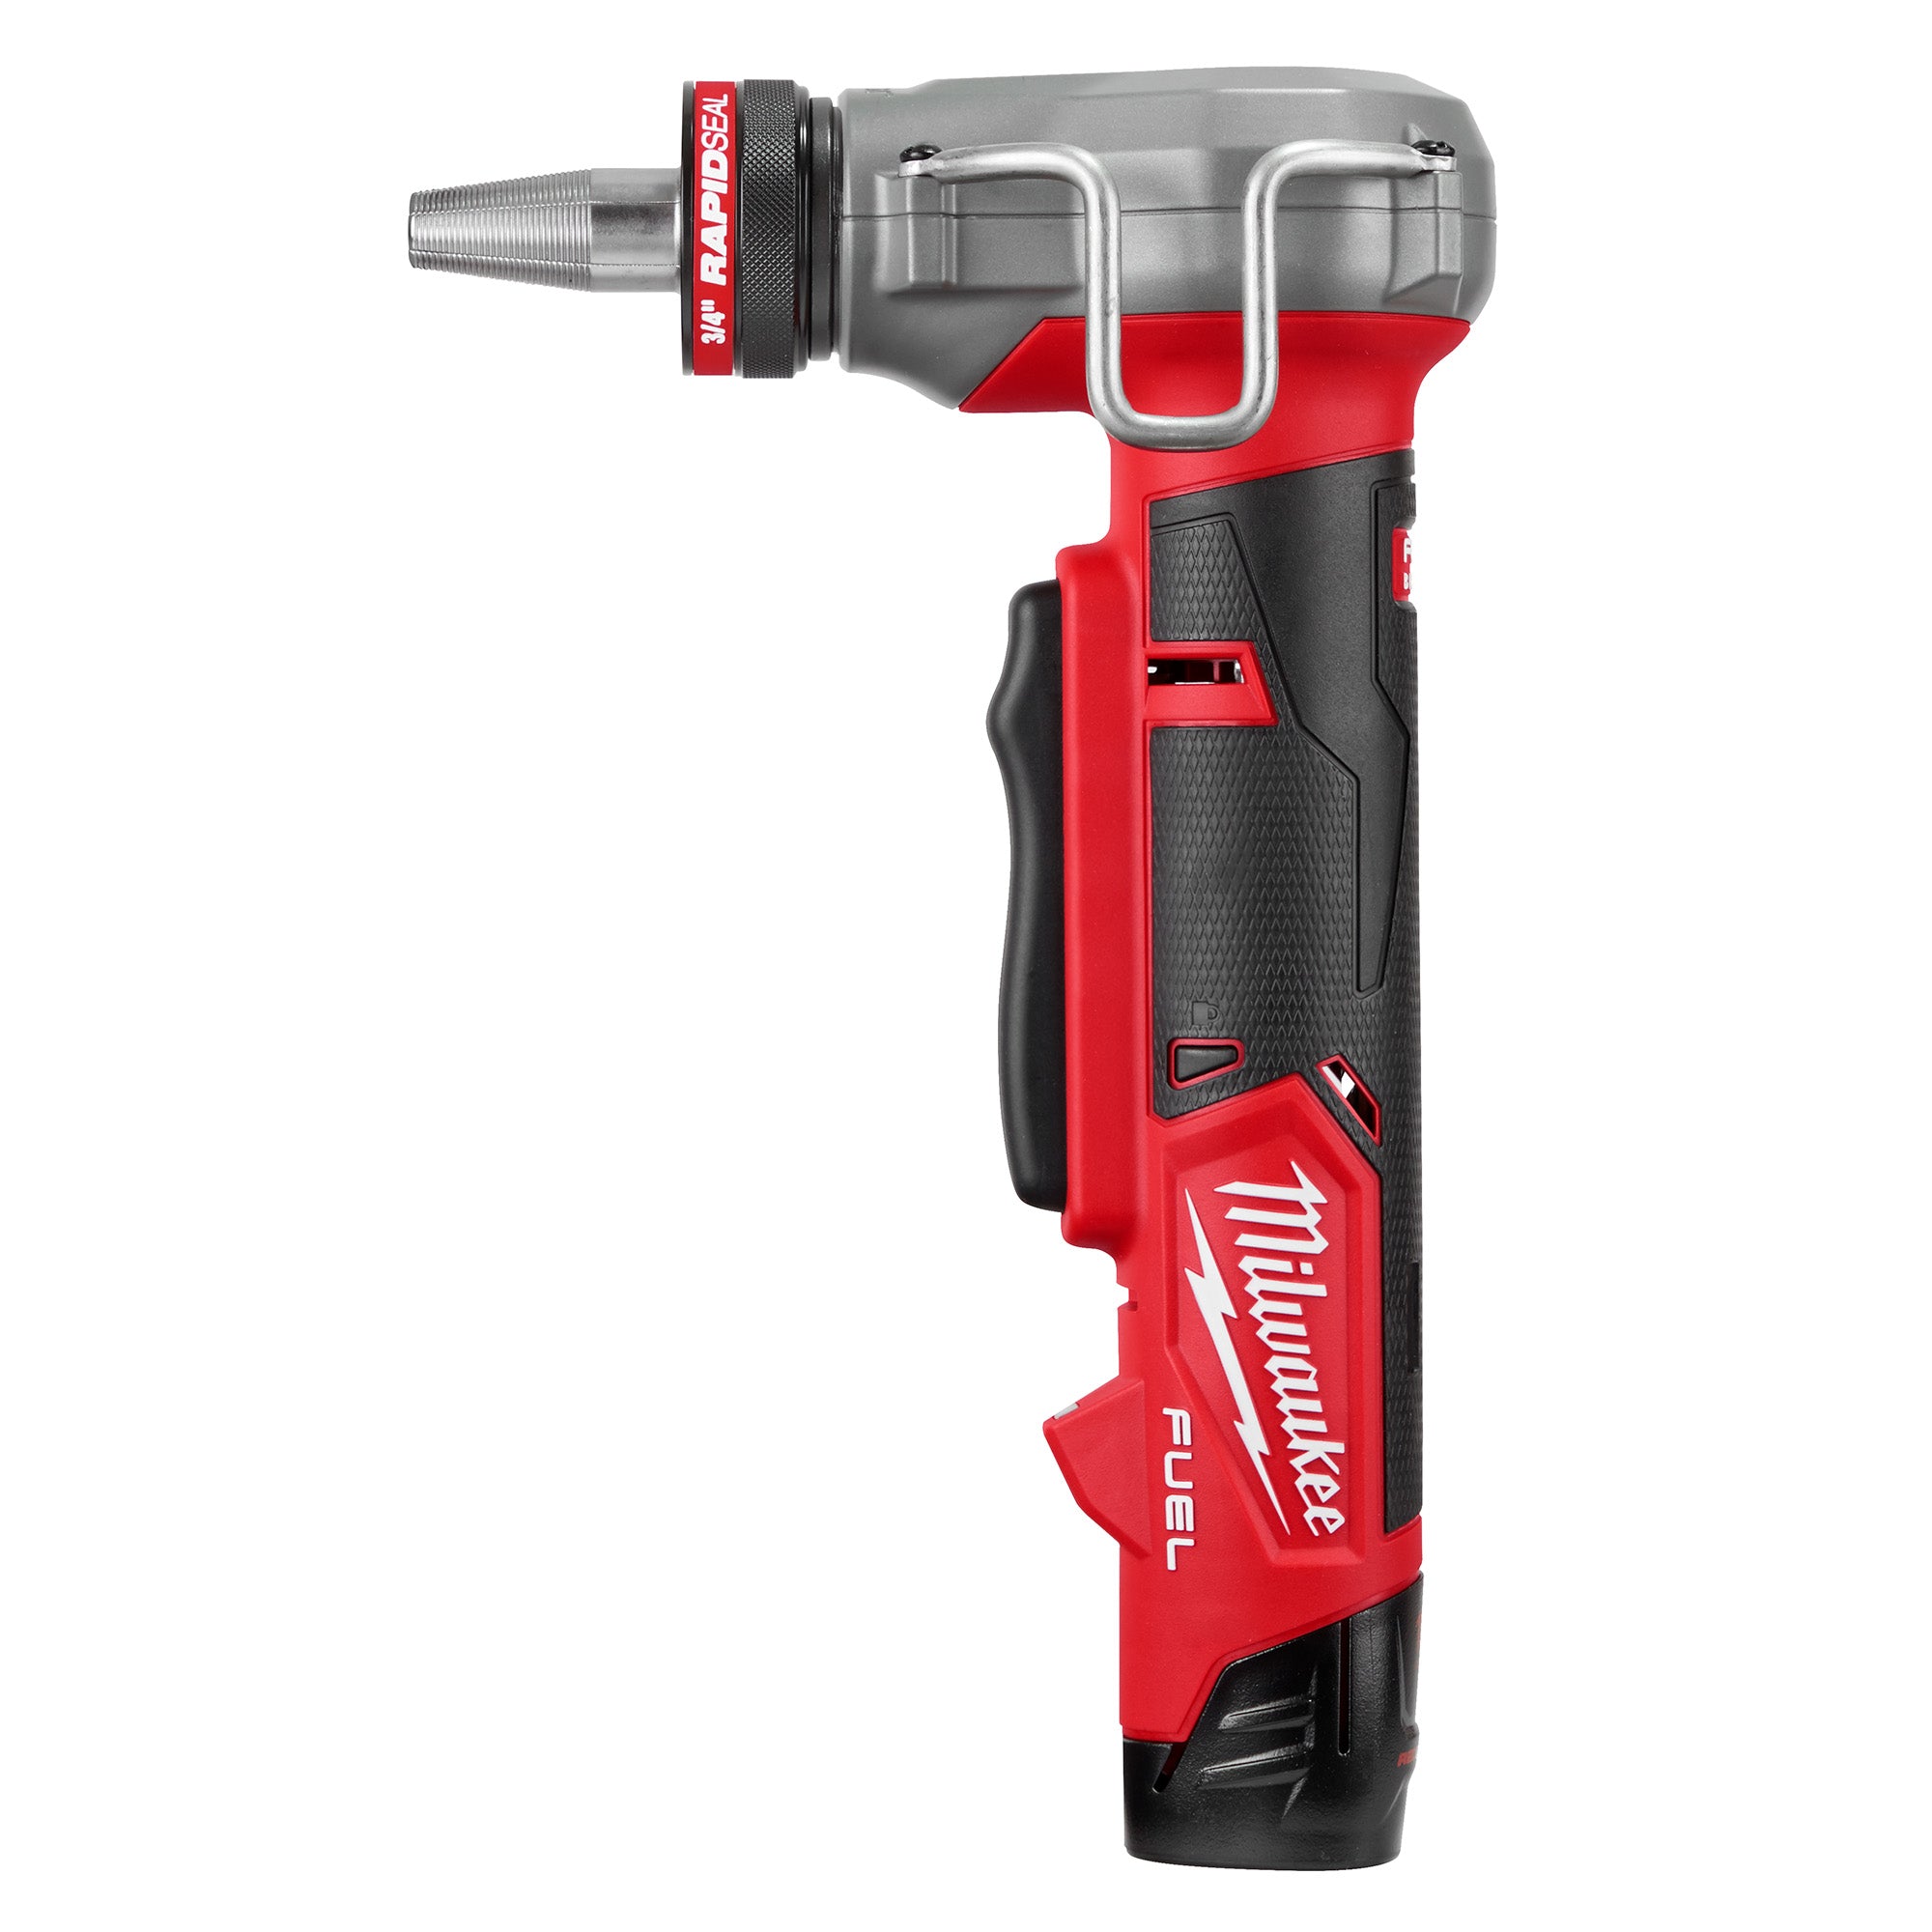 12V M12 FUEL Lithium-Ion Brushless Cordless ProPEX Expander Kit w/ 1/2"-1" RAPID SEAL ProPEX Expander Heads 2.0 Ah